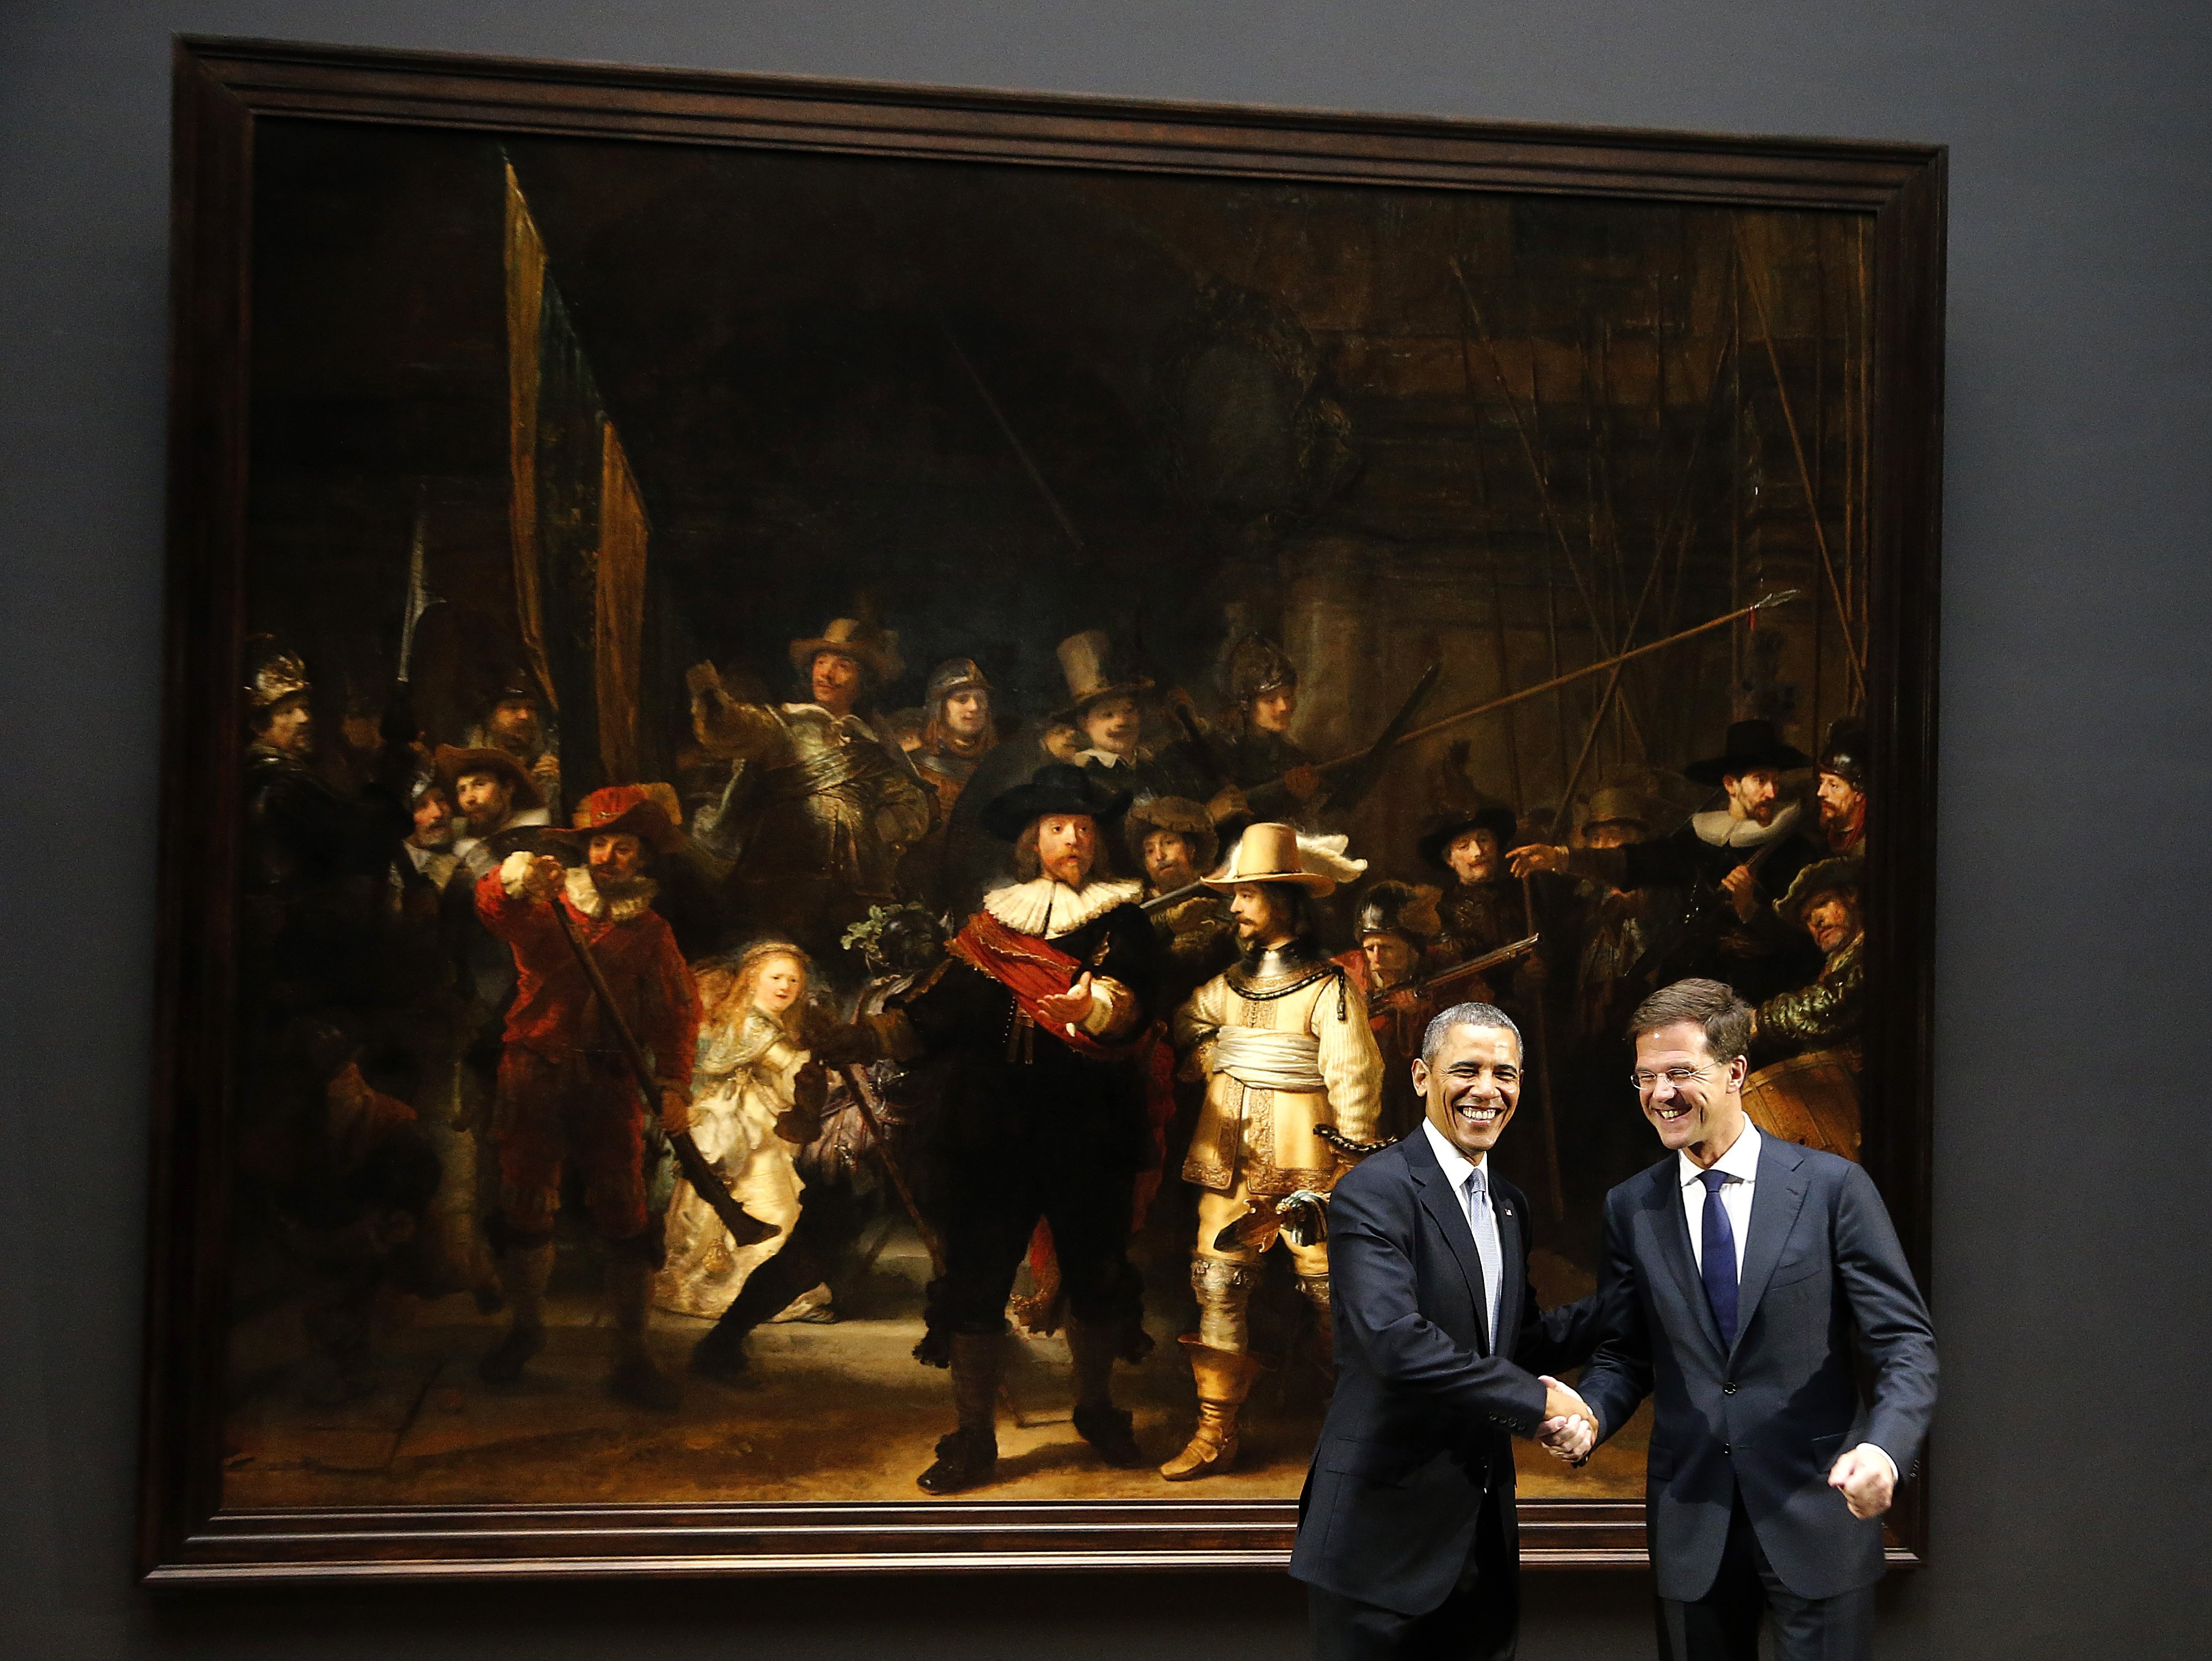 U.S. President Barack Obama, left, shakes hands with Dutch Prime Minister Mark Rutte, right, in front of  Dutch master Rembrandt's The Night Watch painting during a visit to the Rijksmuseum in Amsterdam, Netherlands, Monday, March 24, 2014.